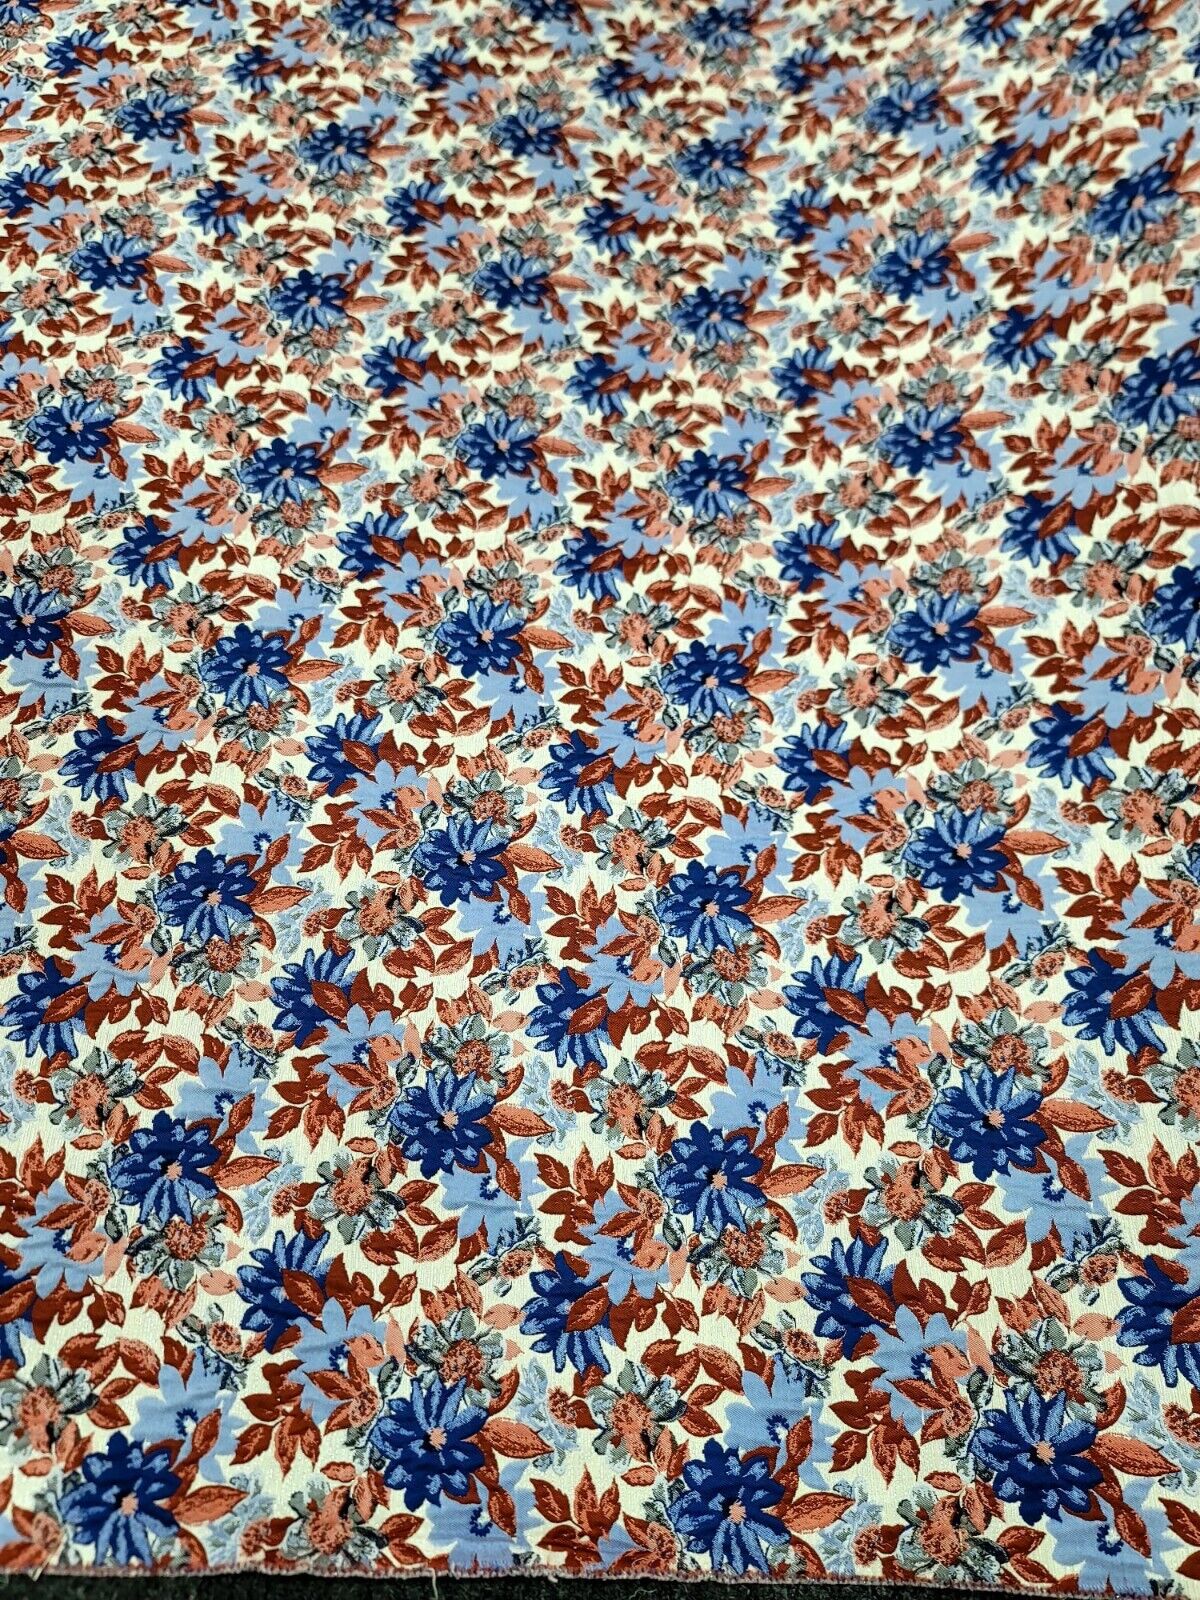 Blue Maroon Coral Floral Chenille Upholstery Brocade Fabric (54 inches) - Sold by the Yard